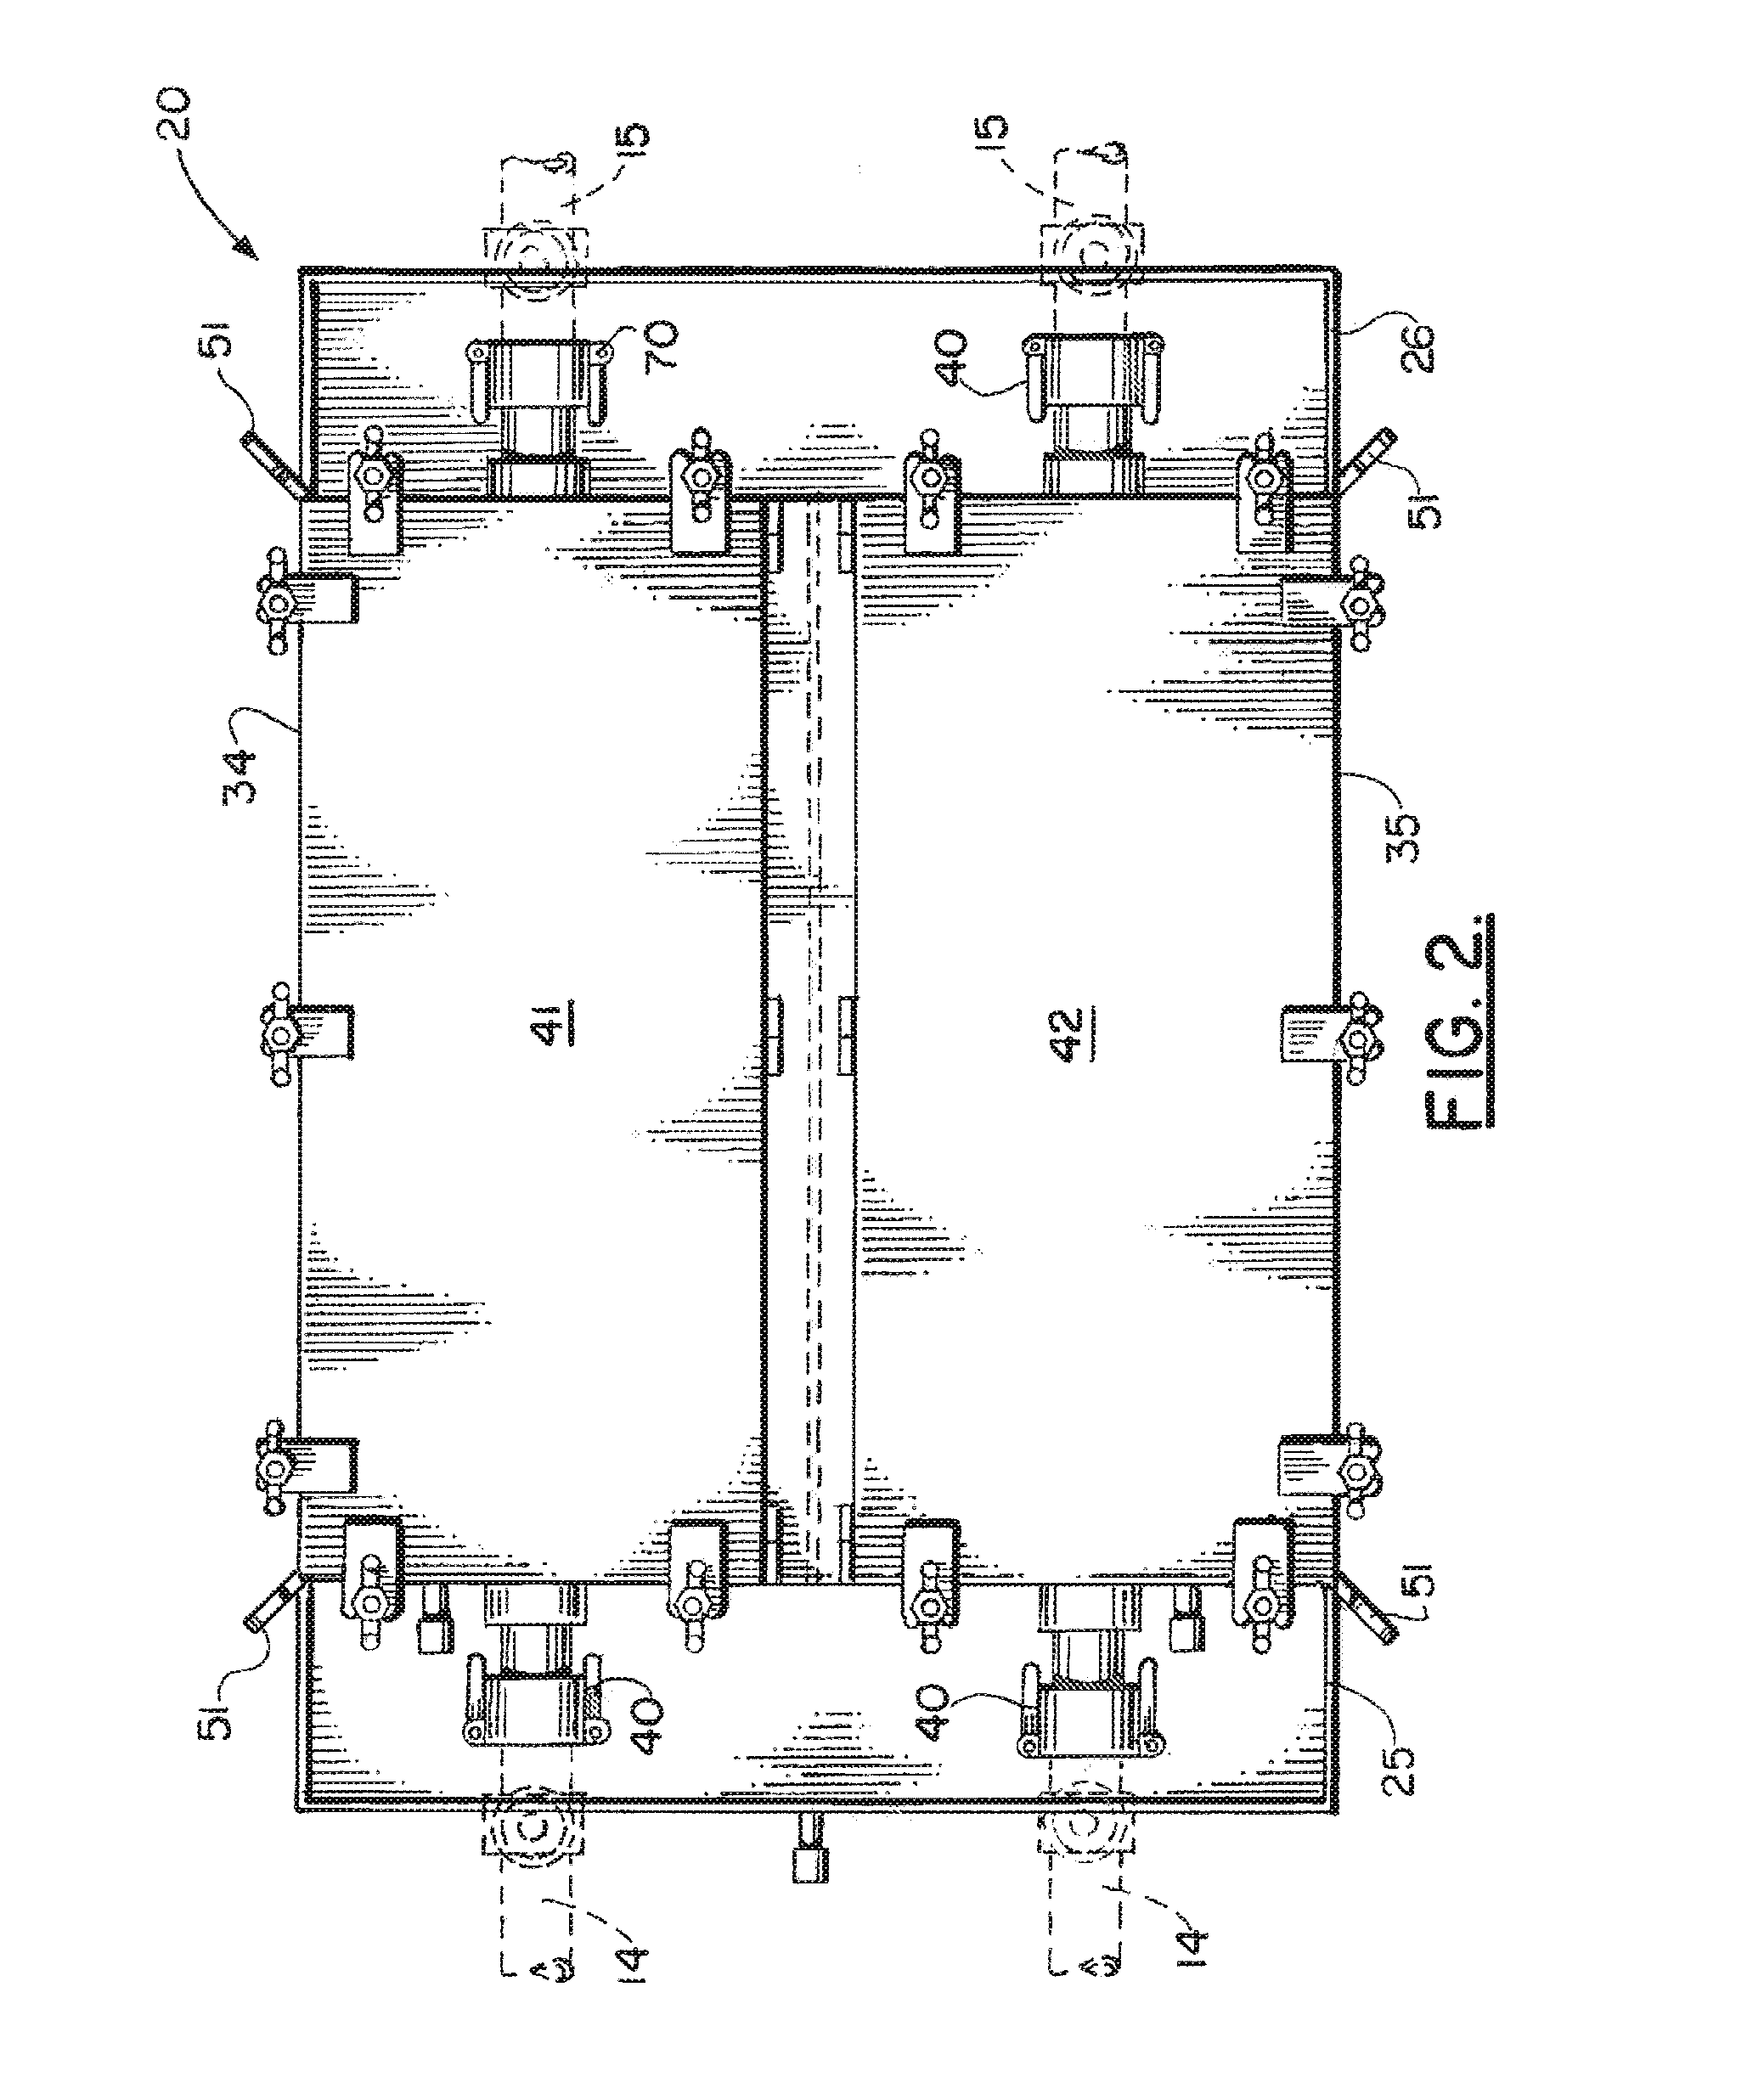 Method and Apparatus for Removing Metallic Matter From an Oil Well Circulating Completion Fluid Stream